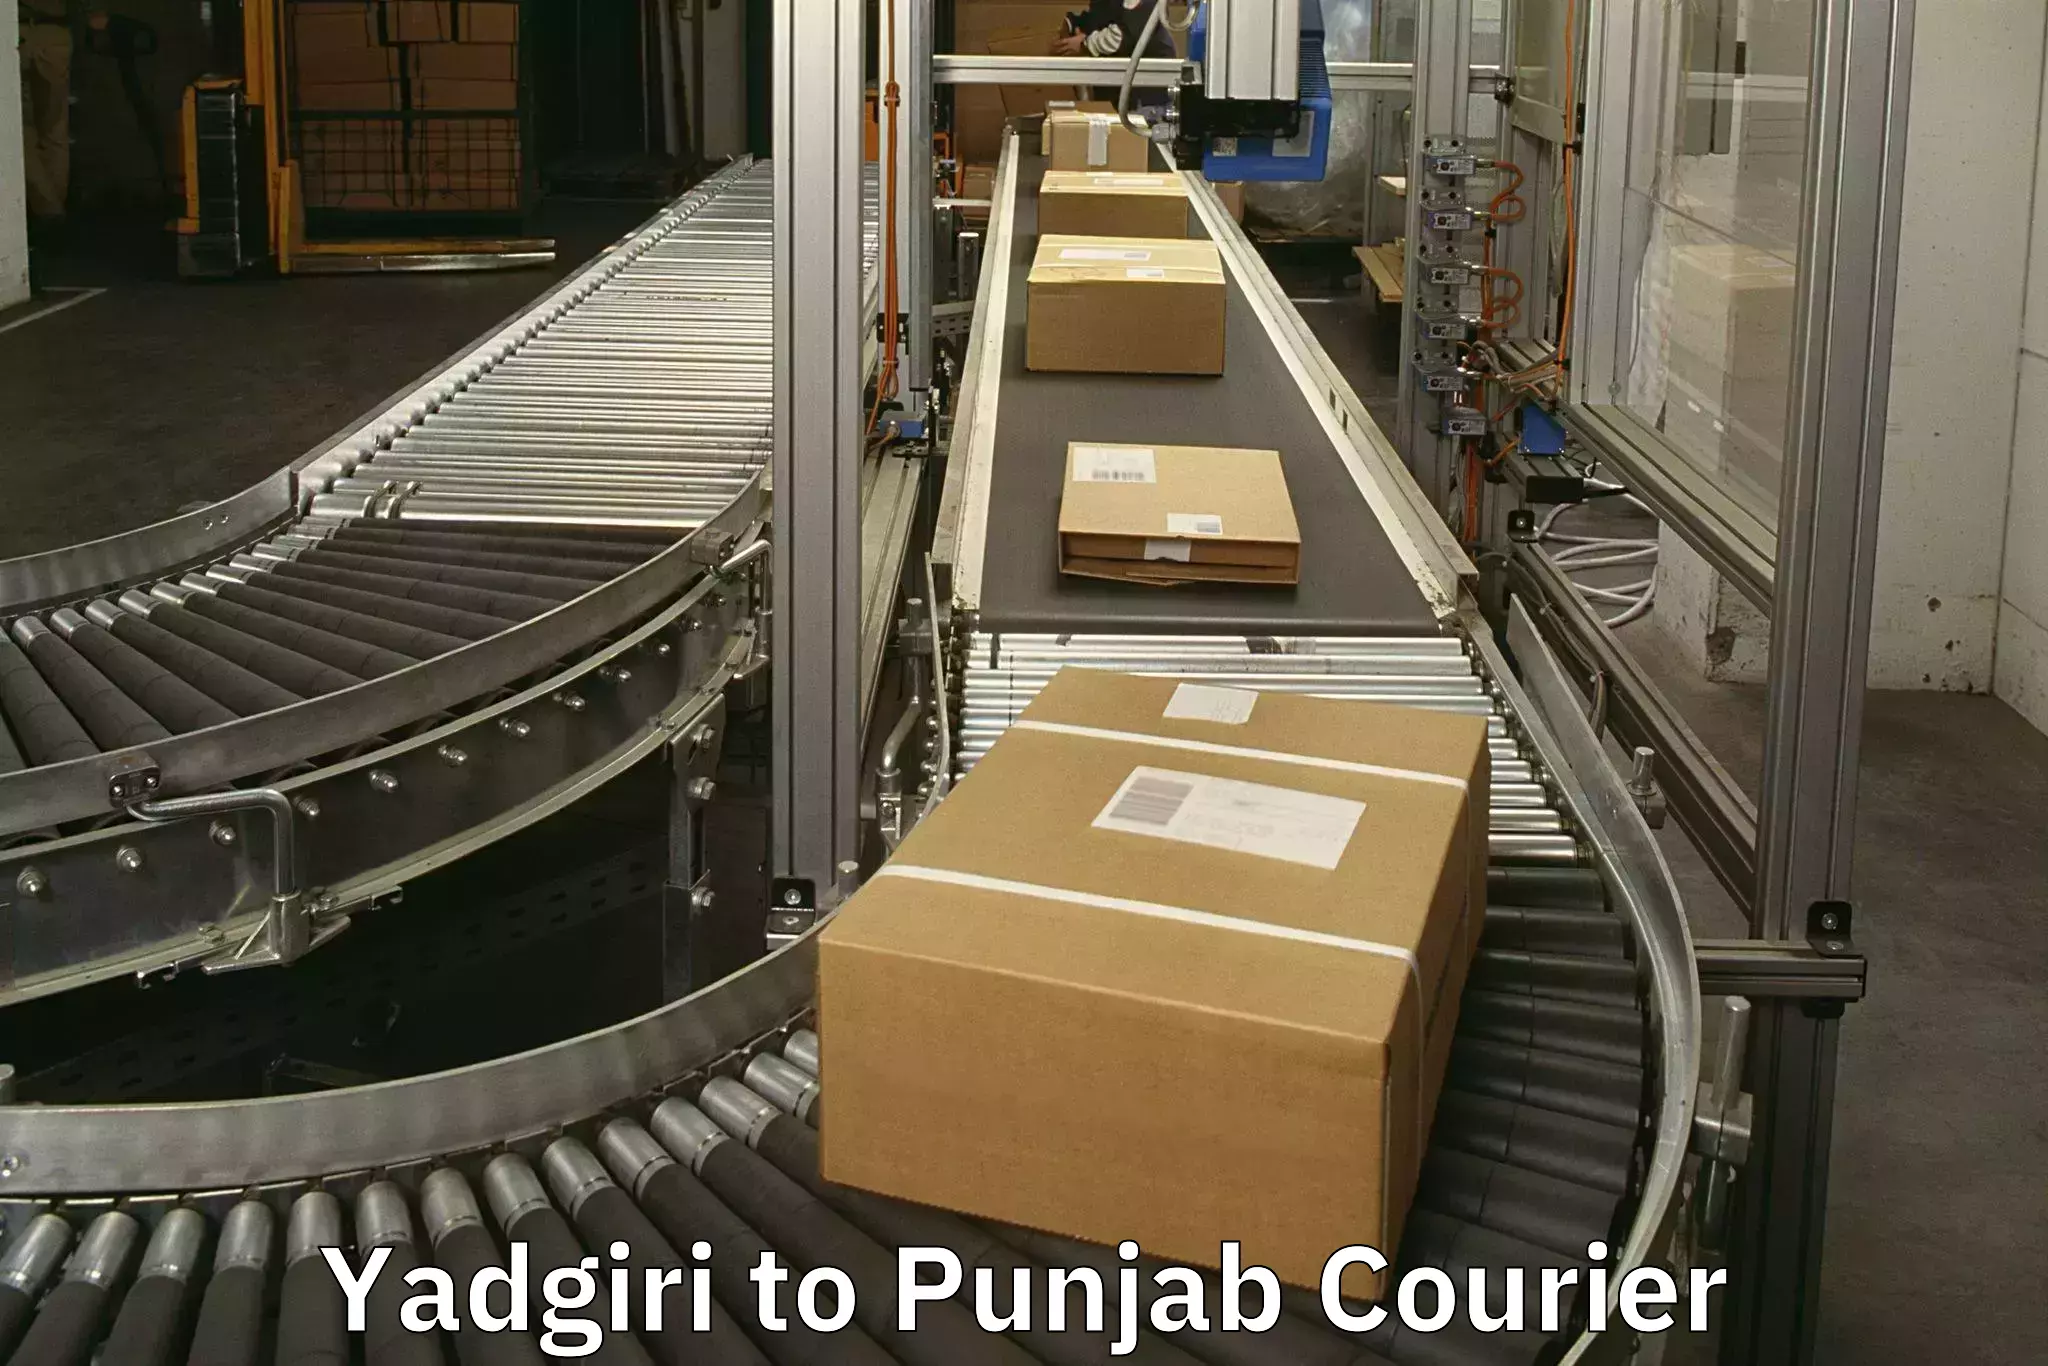 Baggage transport network Yadgiri to Thapar Institute of Engineering and Technology Patiala